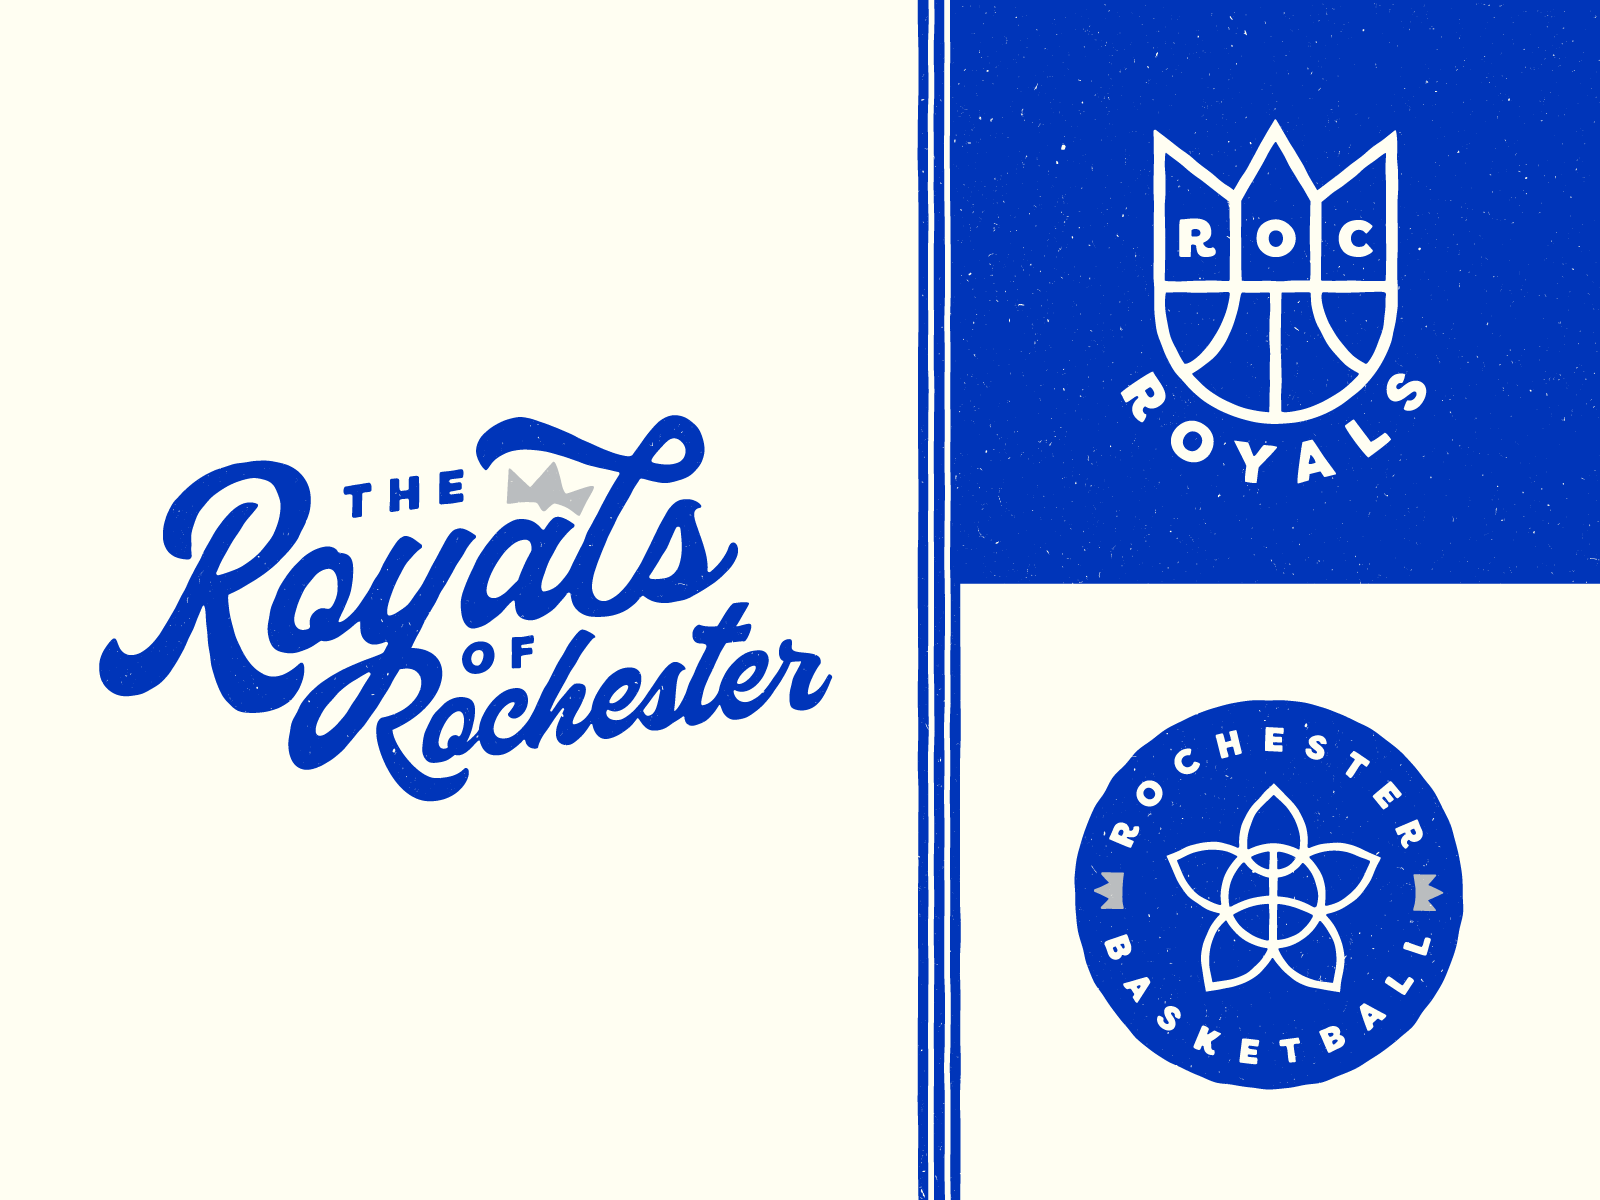 Rochester Royals Team History